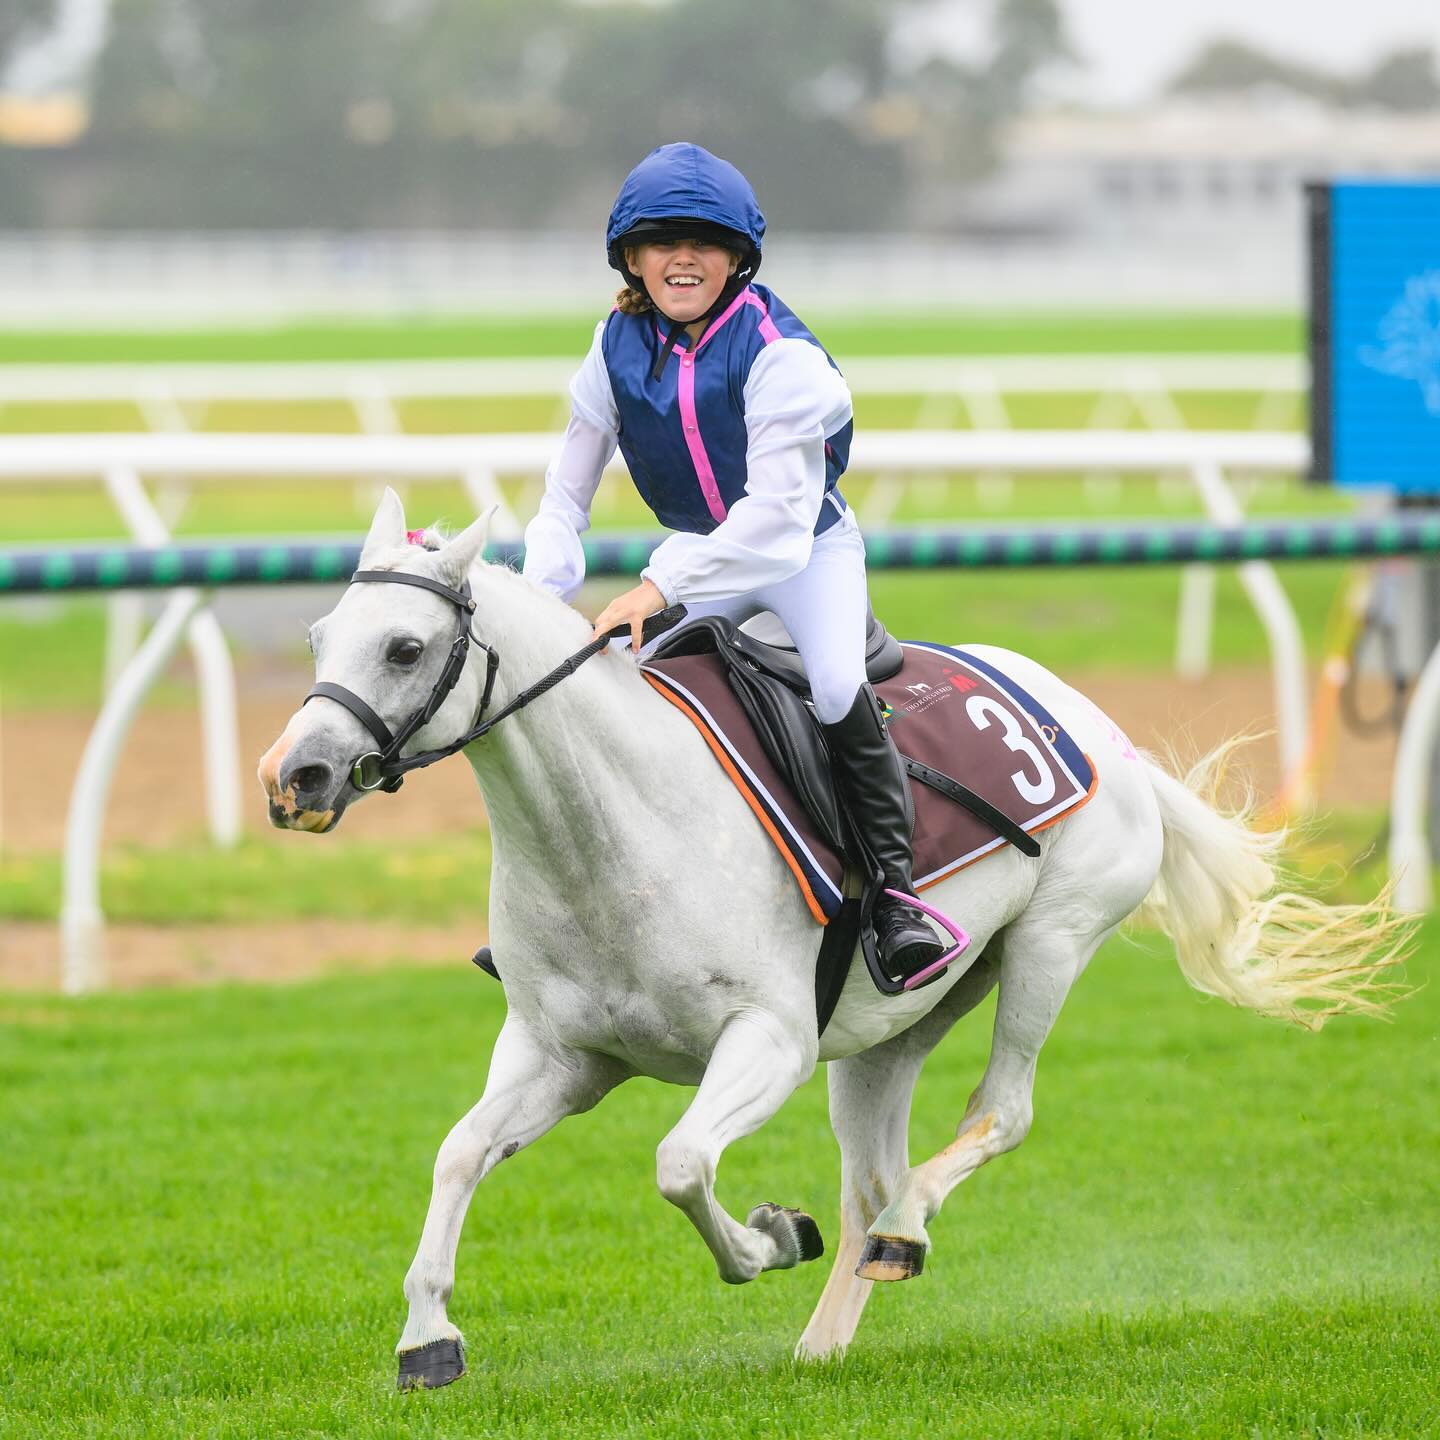 ALL ROADS LEAD TO RANDWICK FOR ‘THE FINALS’ OF THE NATIONAL PONY RACING SERIES